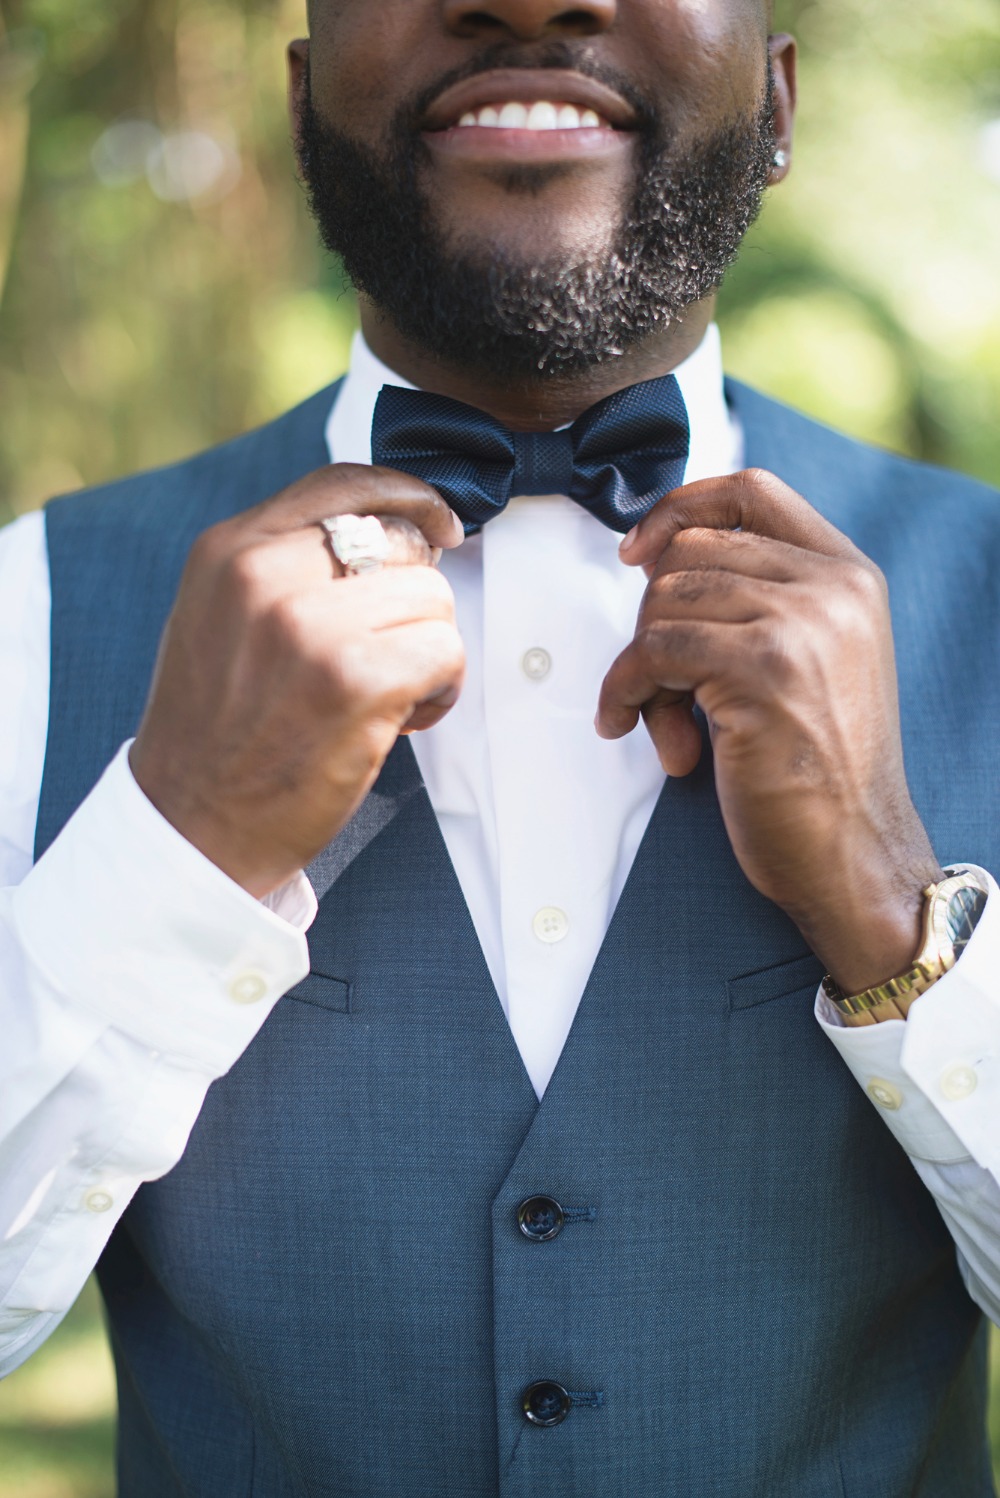 Dapper groom and bow tie